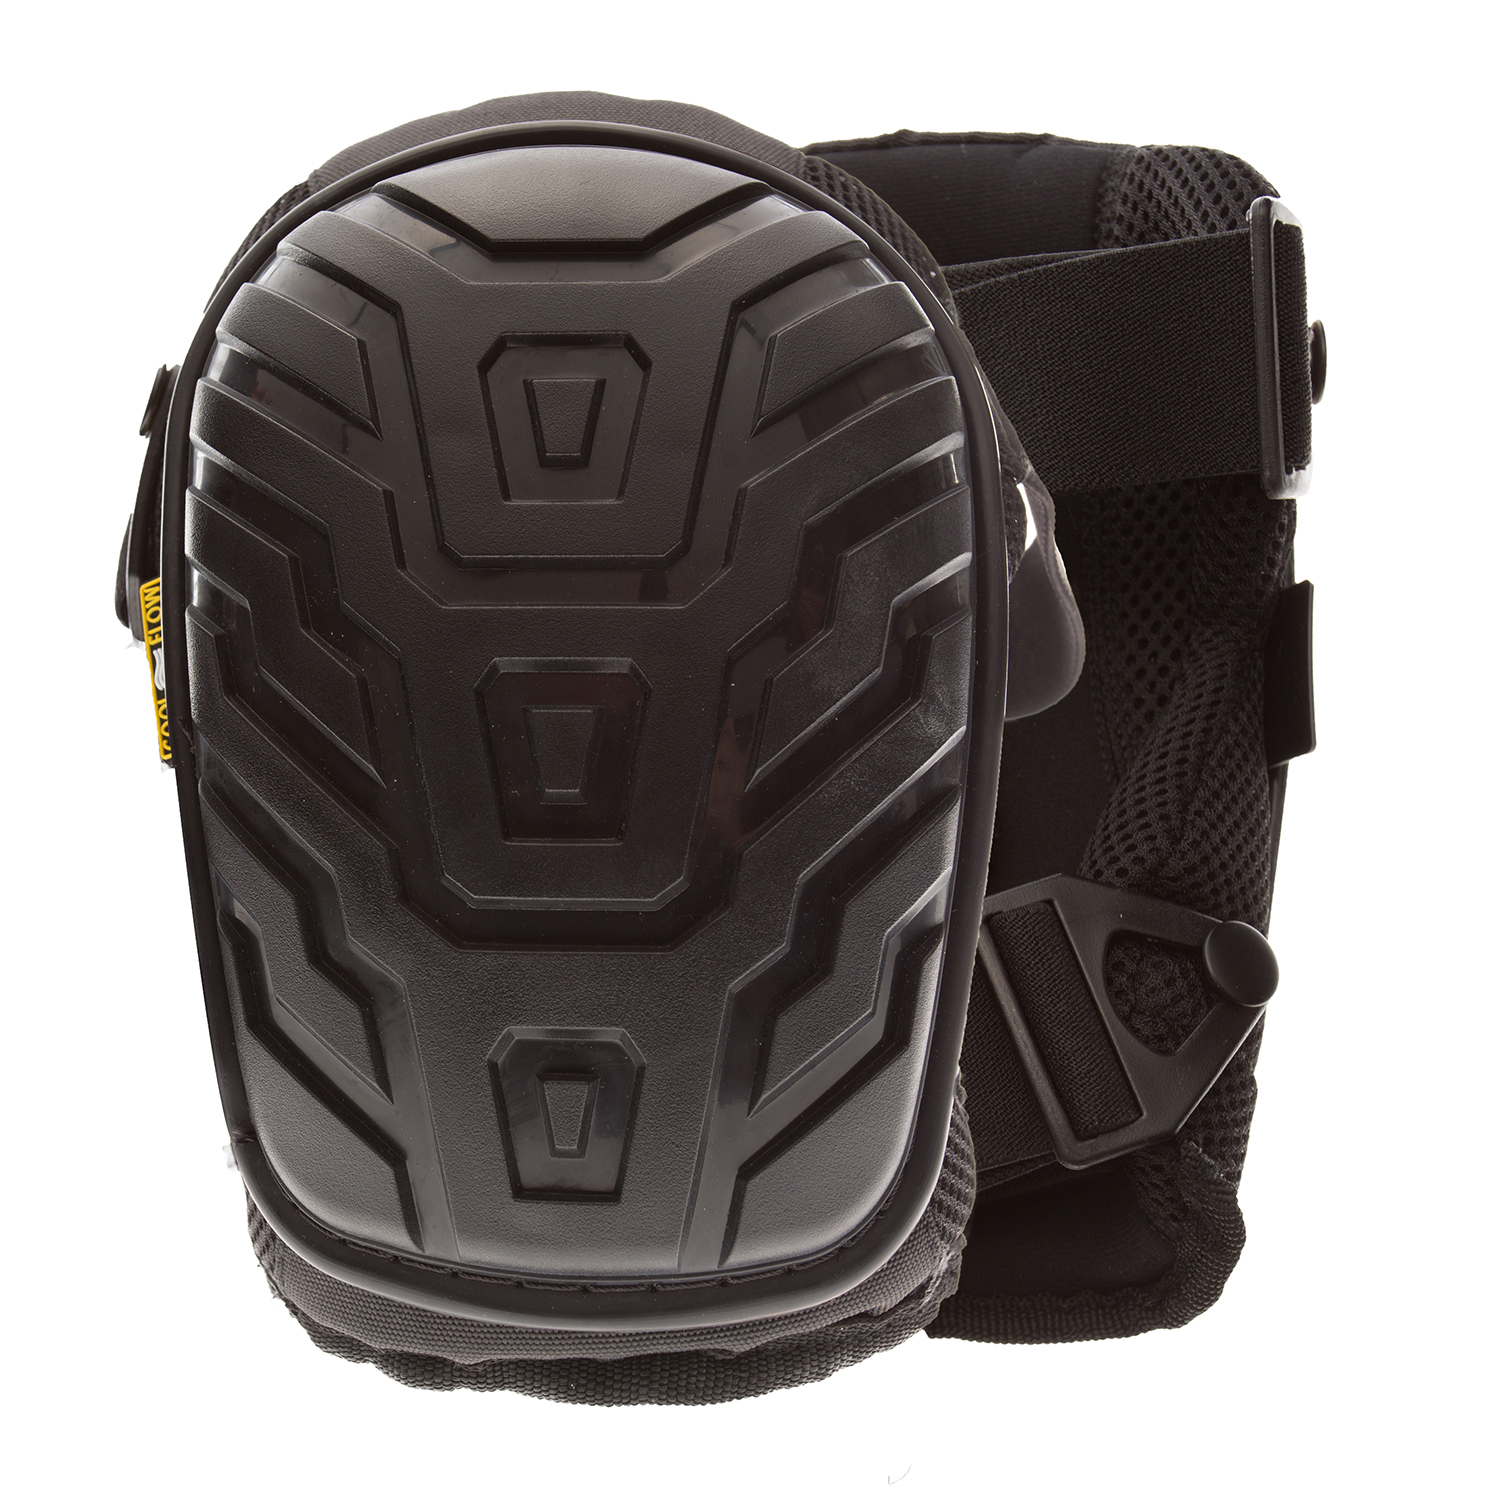 IMPACTO 868-00 KNEE PAD GEL LITE HARD SHELL ROUNDED CAP